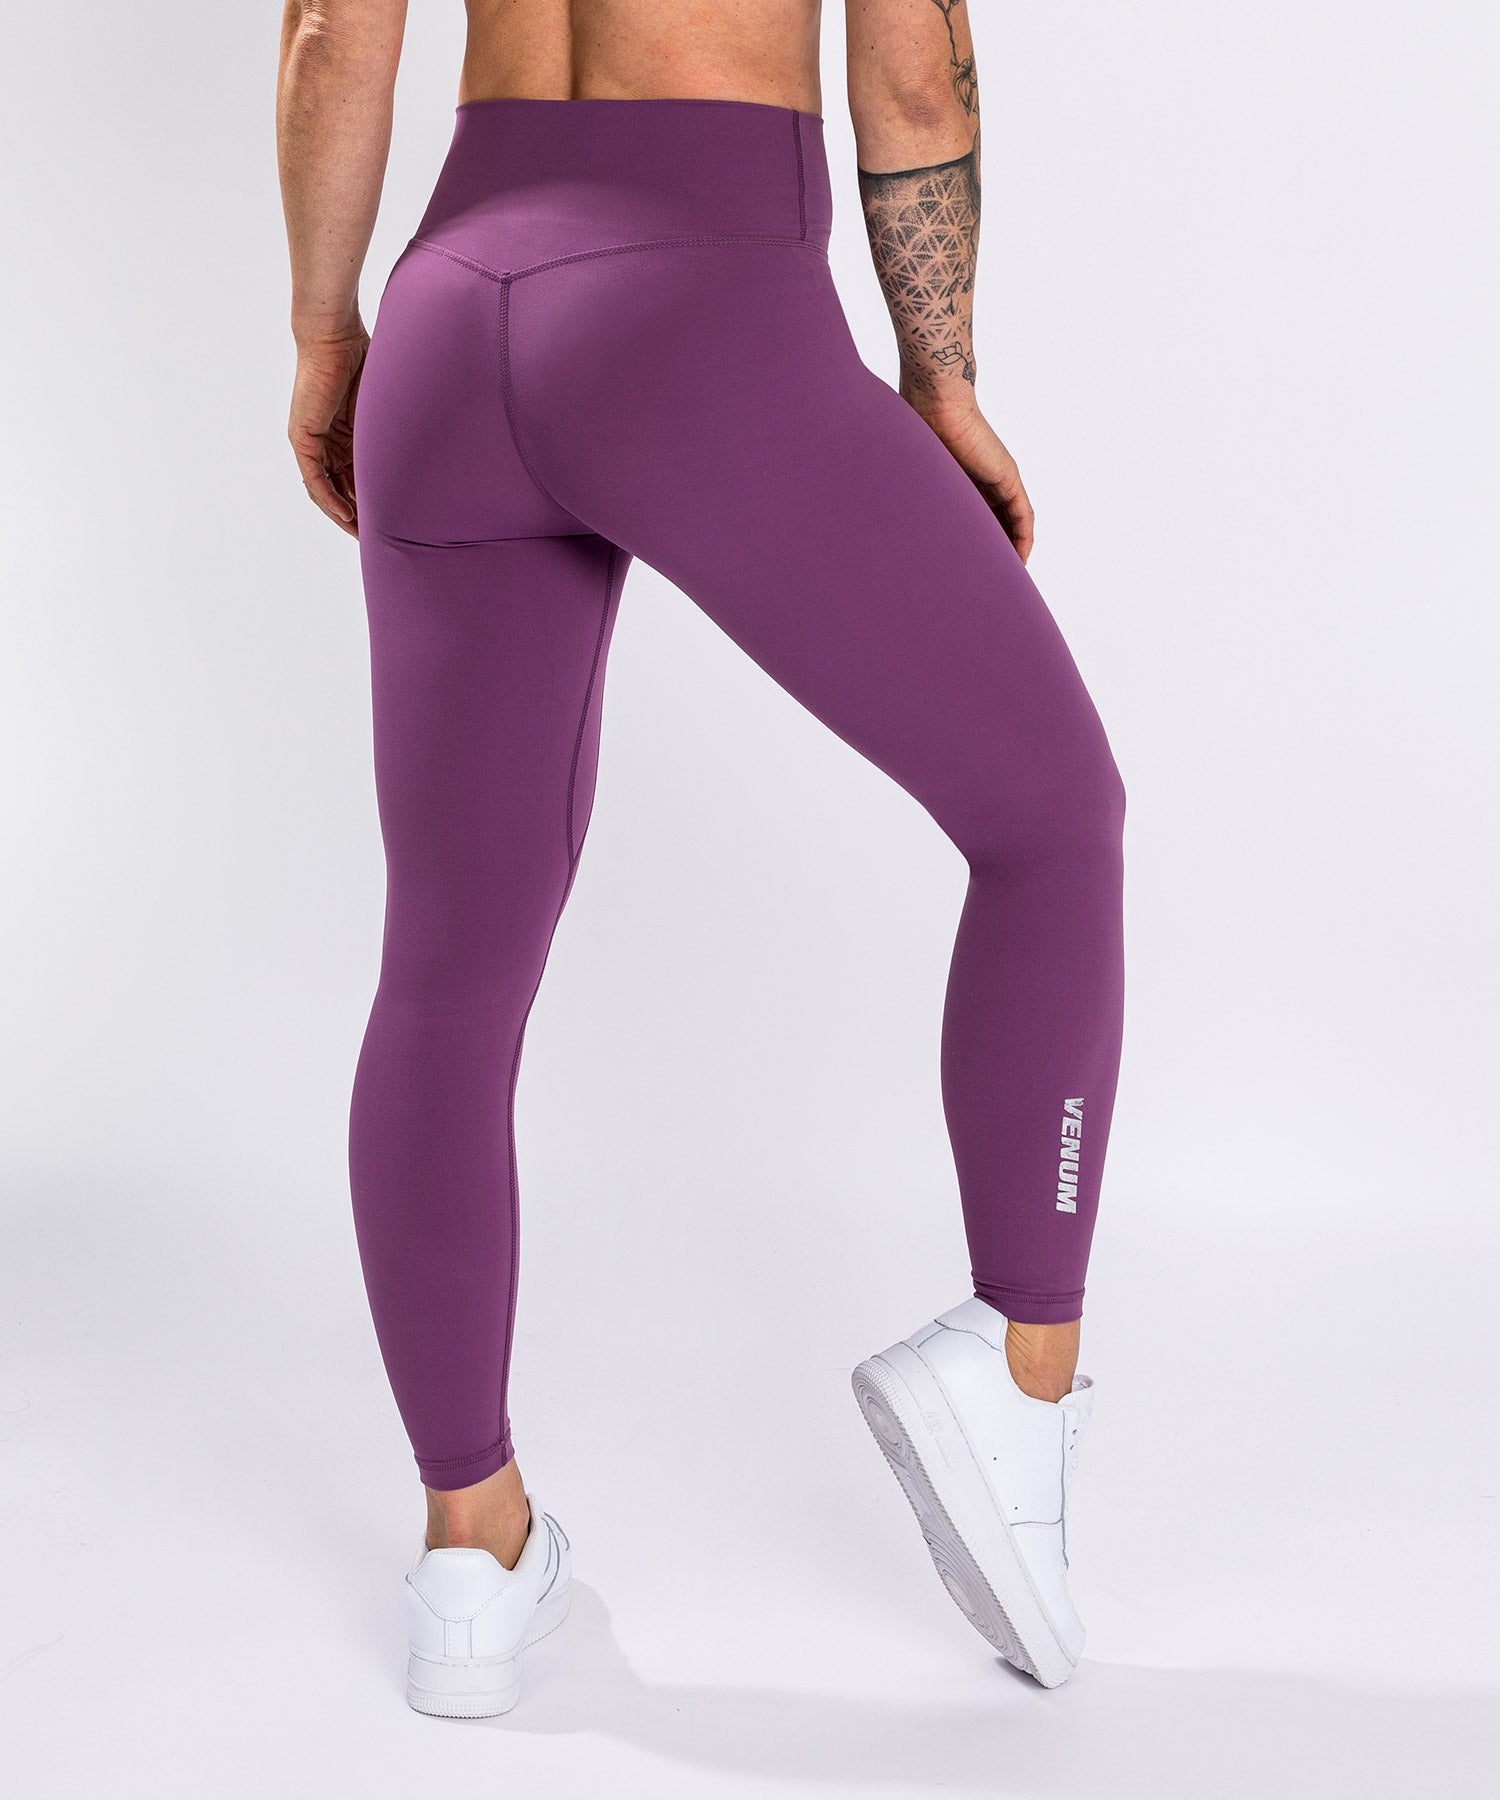 Luxury Balloons in Gold Silver And Black Yoga Pants For Women High Waist  Leggings with Pockets For Gym Workout Tights : Amazon.co.uk: Fashion